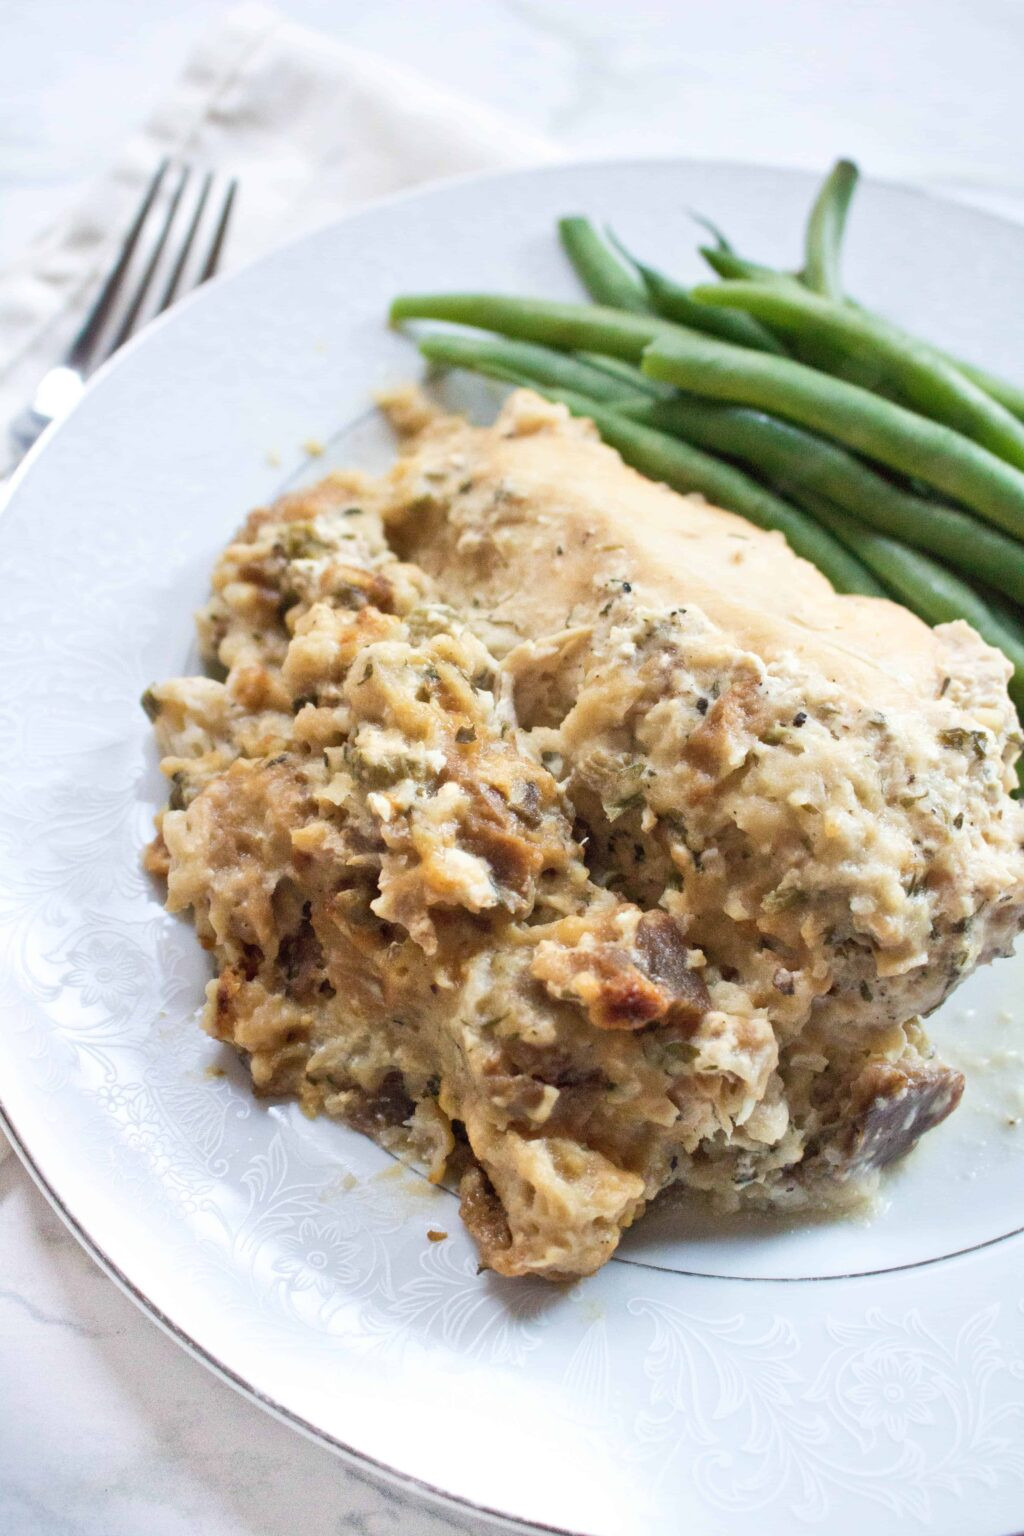 Crockpot Chicken and Stuffing without Cream soup Lovely Crock Pot Chicken and Stuffing From Scratch Served From